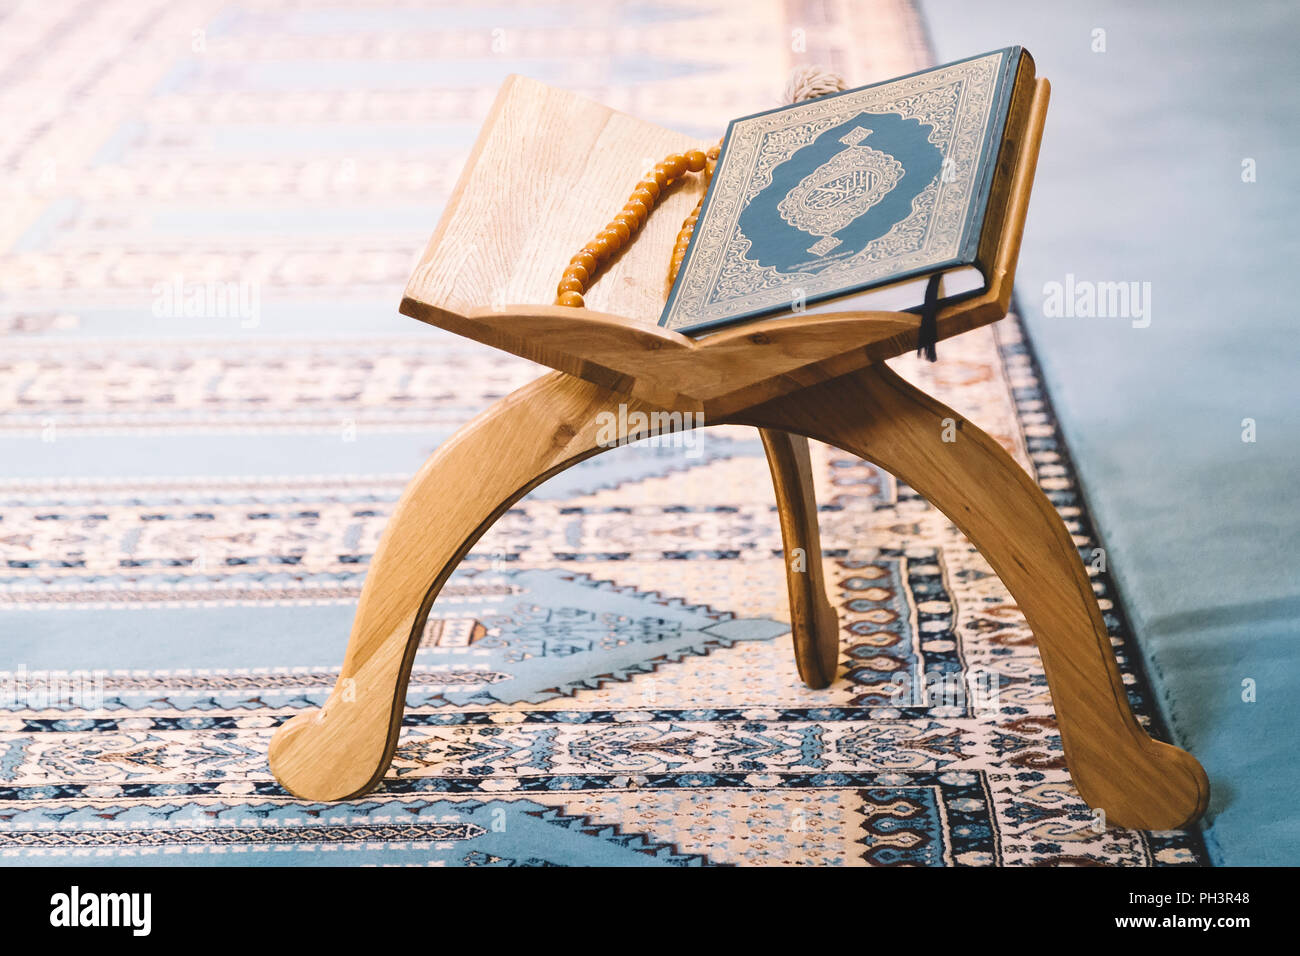 Quran, holy book of Muslims around the world, on wooden stand Stock Photo